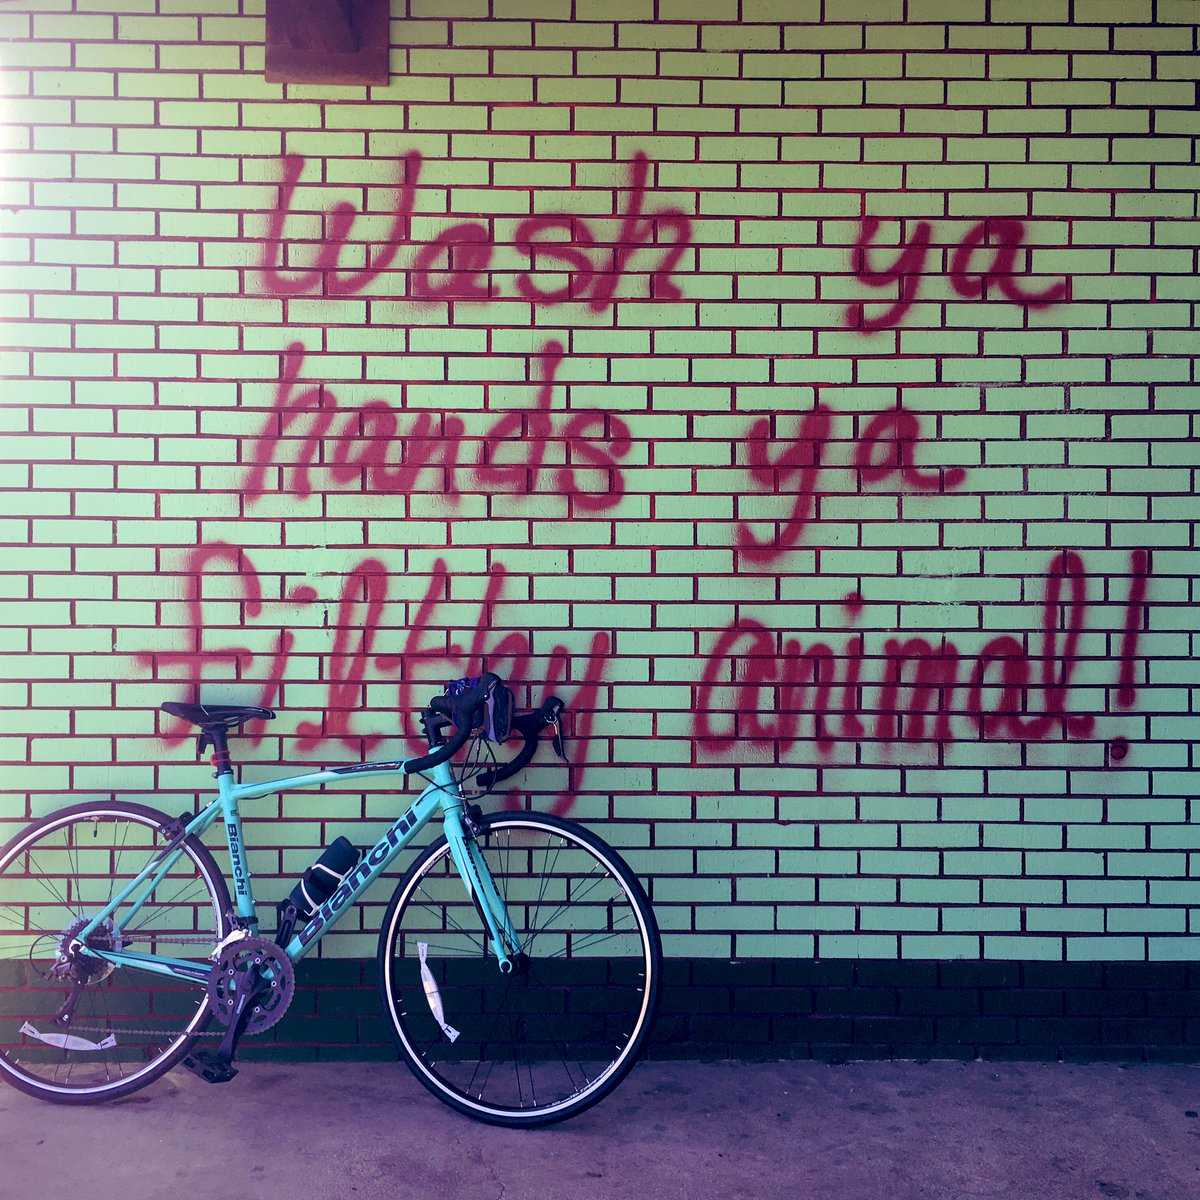 #BikeMonth day 1 

As I was coming to my front door, I met my neighbors for the first time as they were heading out on a ride. Being on #bicycles gave us an easy introduction talking point! 

Also, wash your hands! 

#BikesUnite #ridebikes